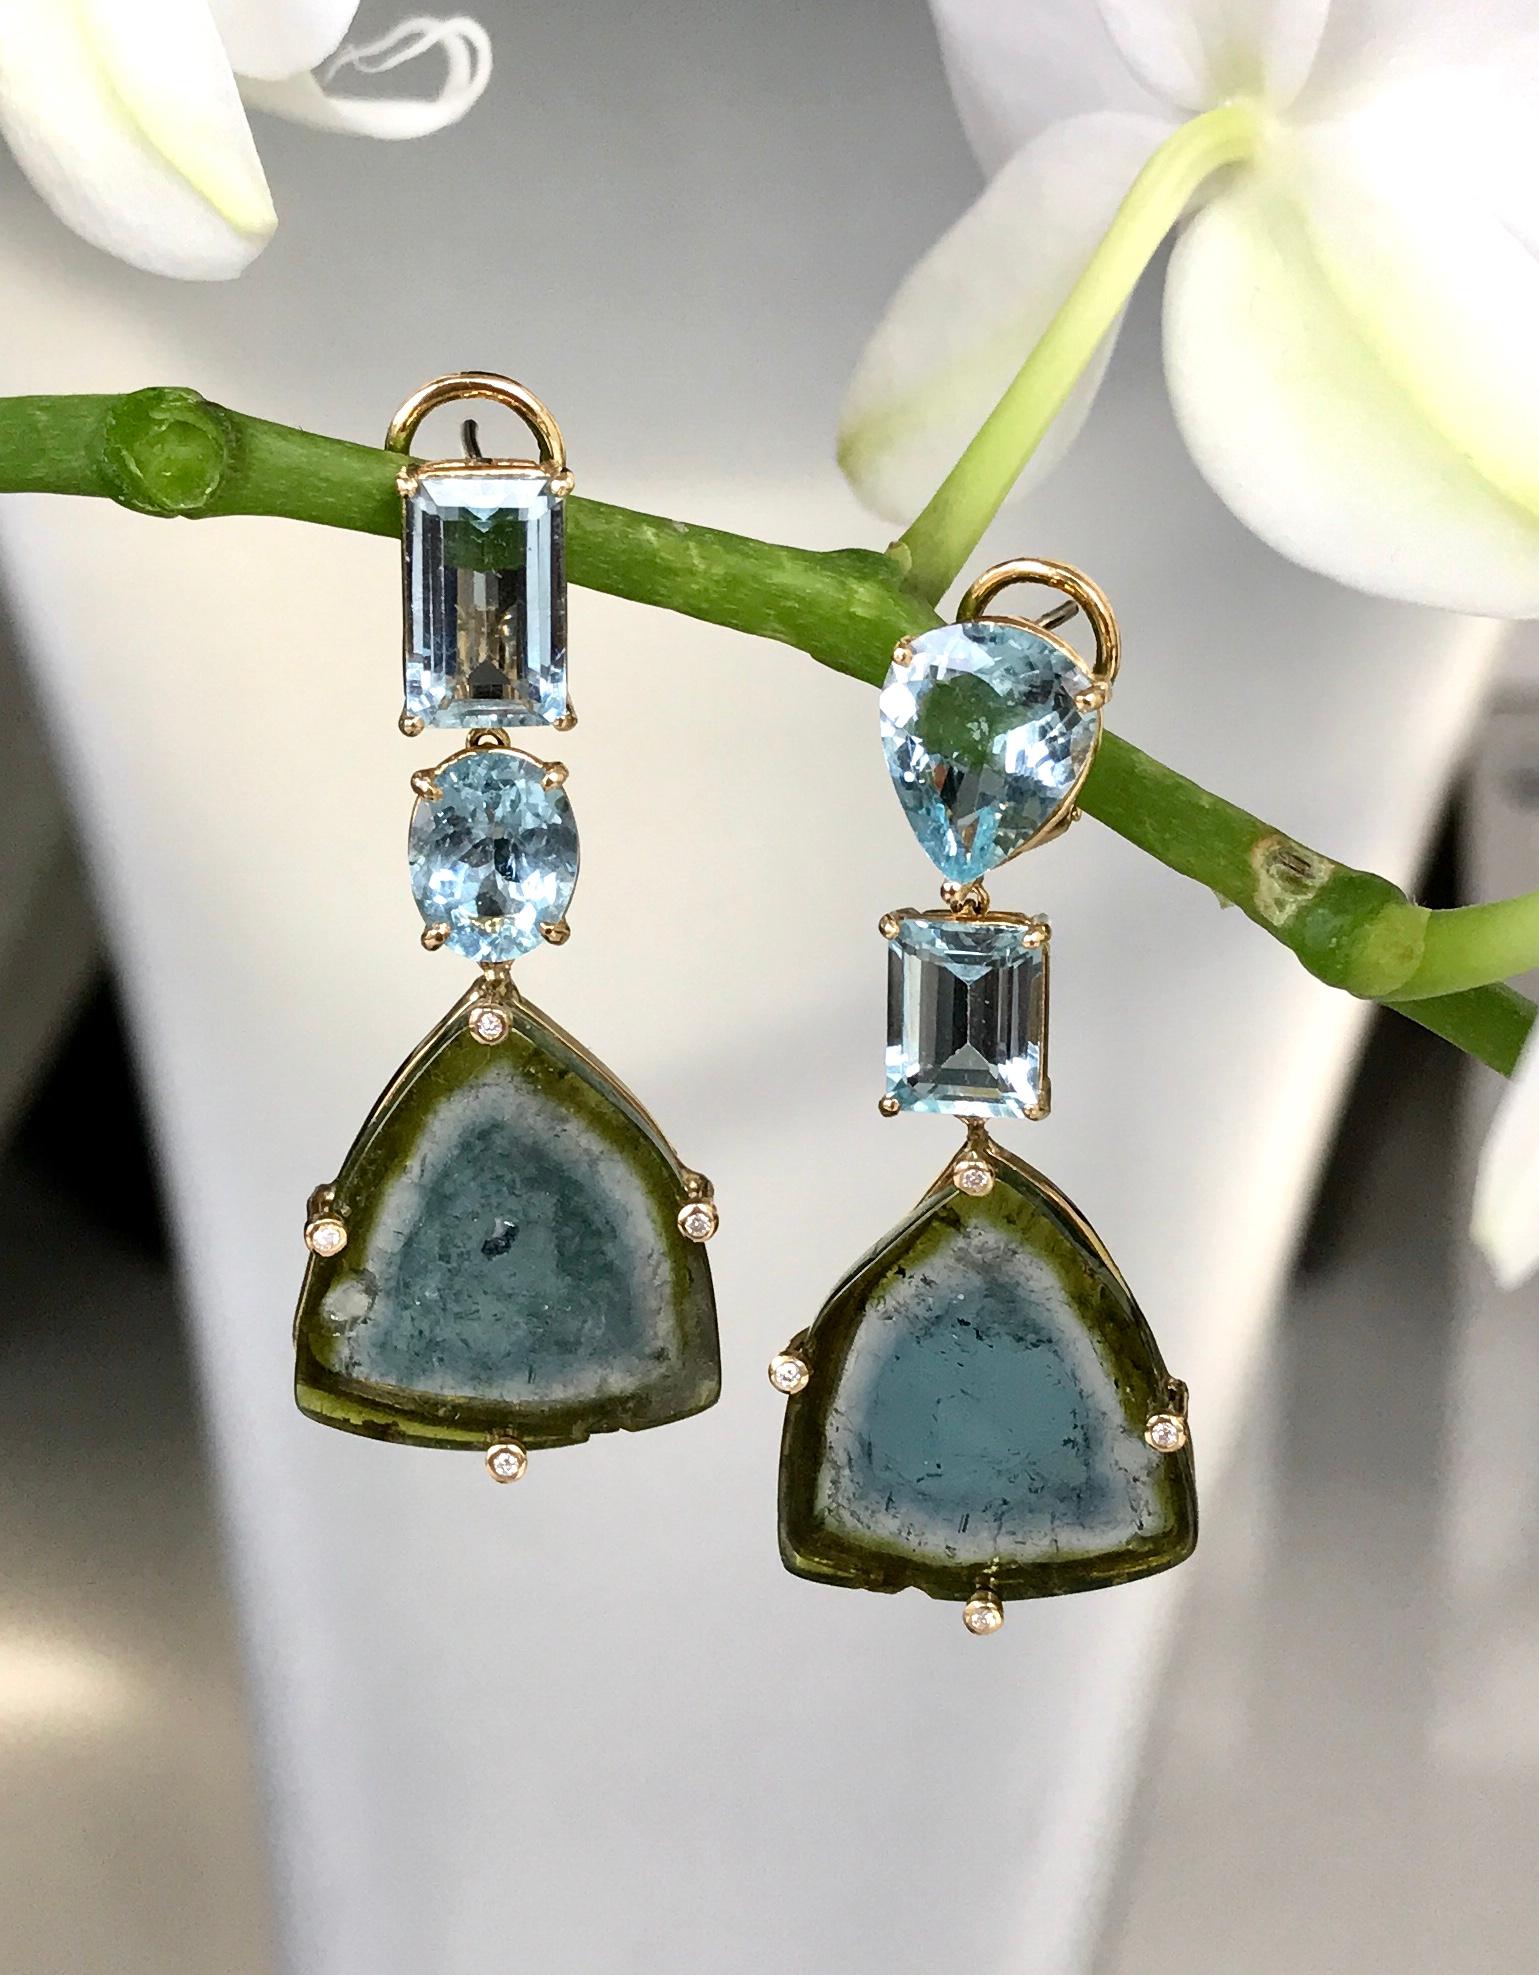 Joon Han one-of-a-kind earrings with unusual and rare bicolor blue and green 